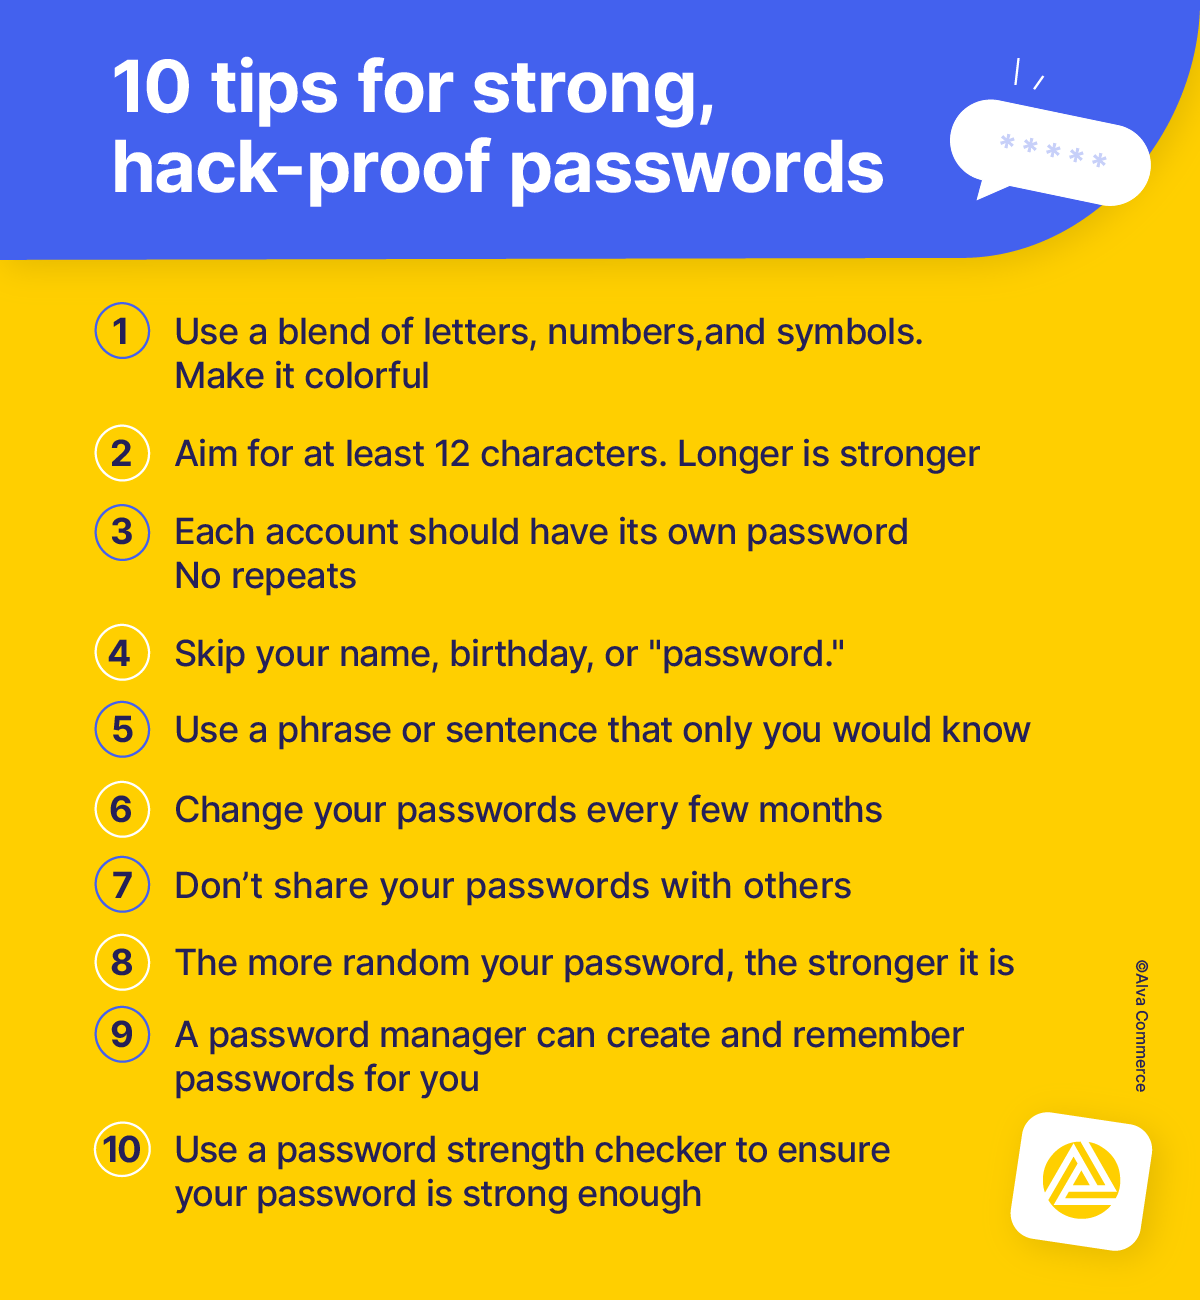 A checklist with 10 tips for strong password